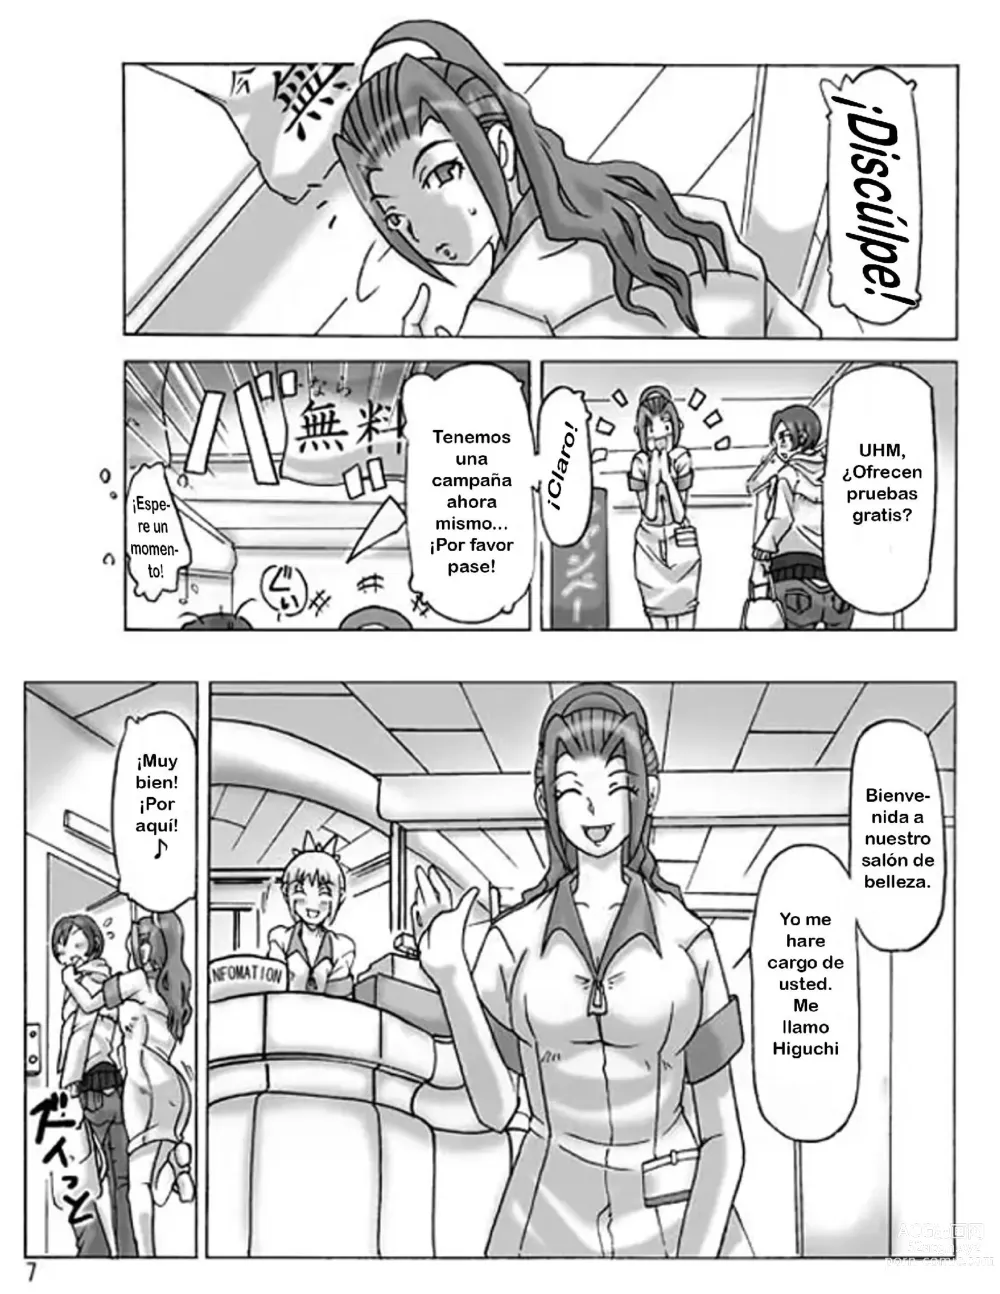 Page 9 of doujinshi Purchased Costume 3